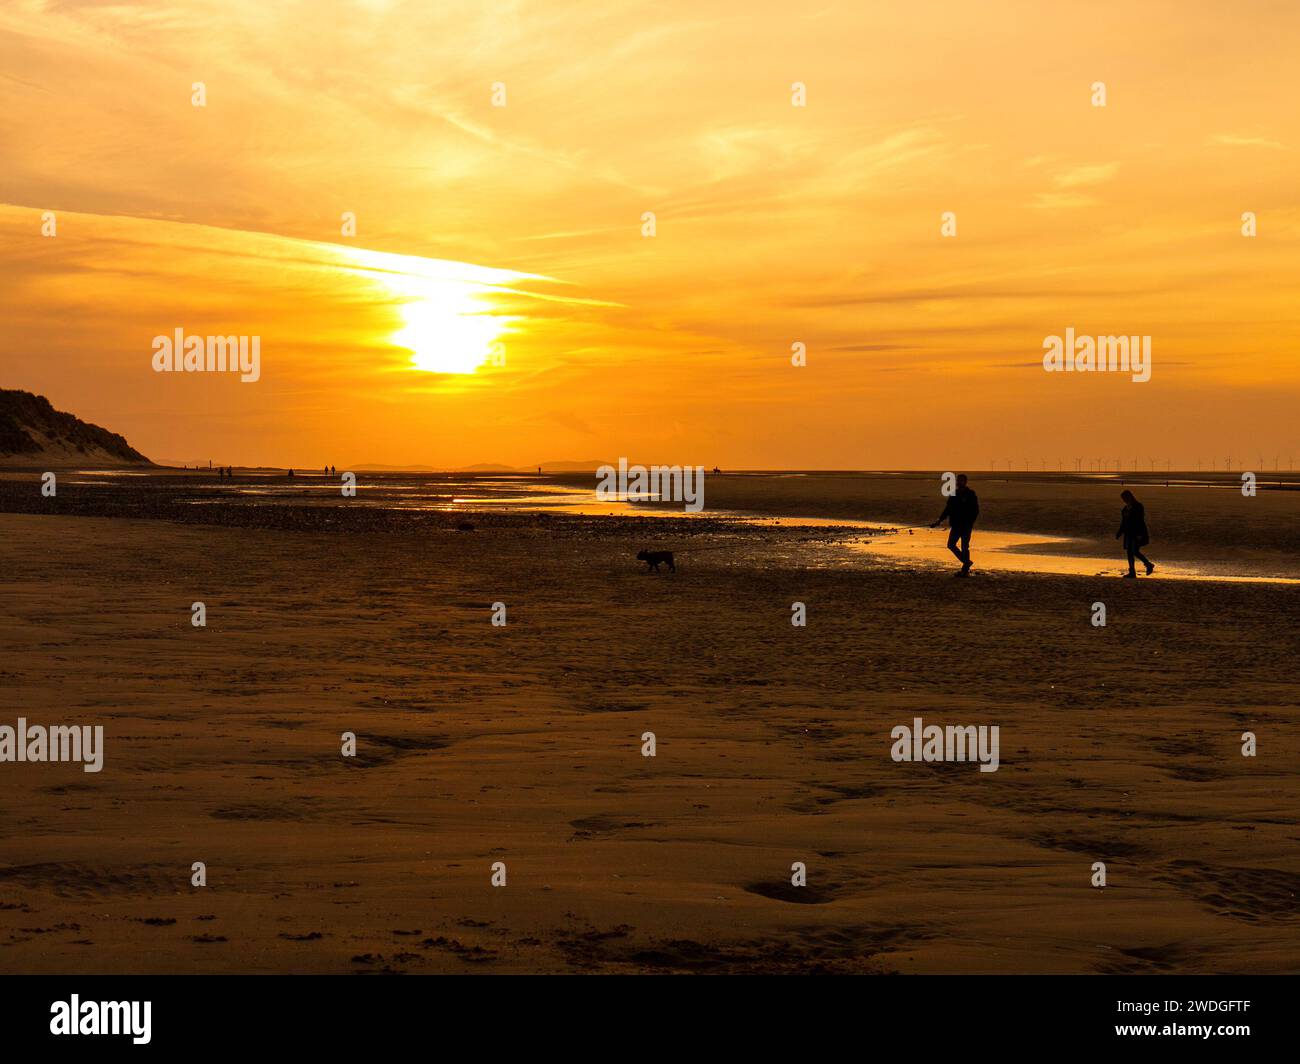 Couple walking a dog at sunset on Talacre beach at low tide, Talacre, Flintshire, Wales Stock Photo